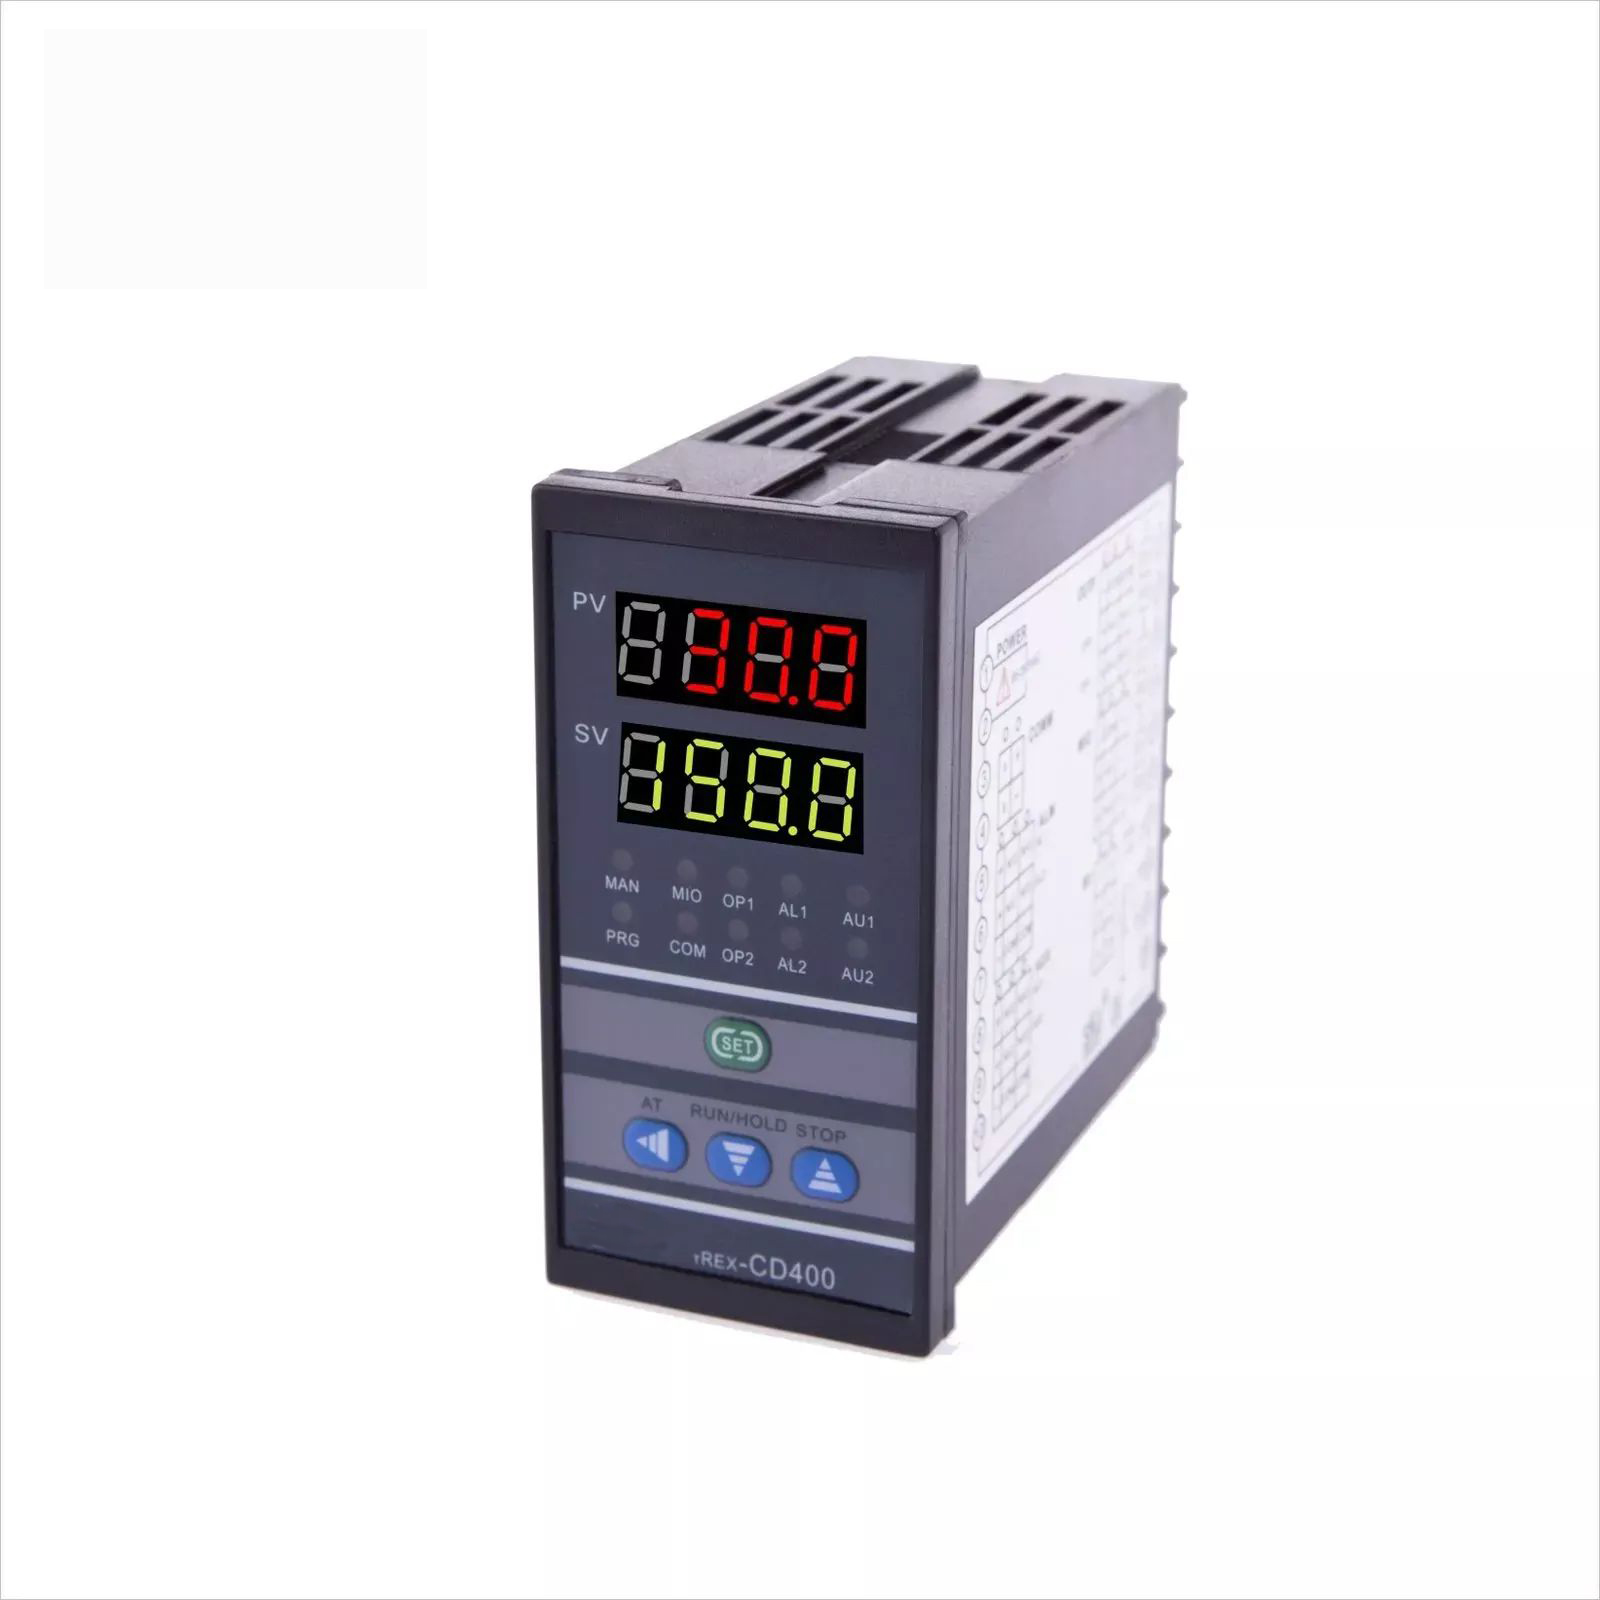 AT908-CD400 Rs485 MODBUS modular intelligent PID multi-function controller Featured Image